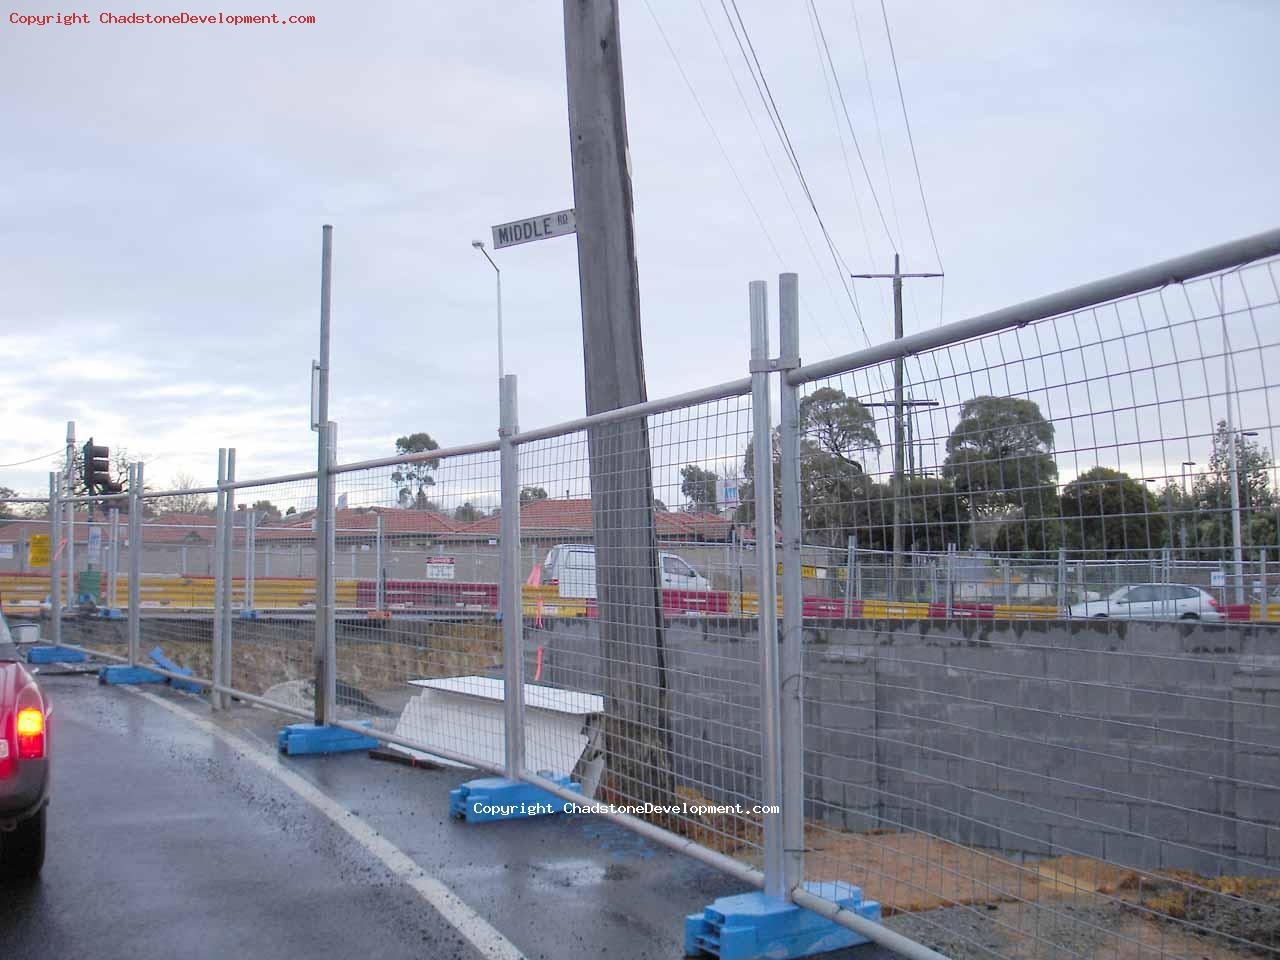 Brick wall under construction at temporary slip lane - Chadstone Development Discussions